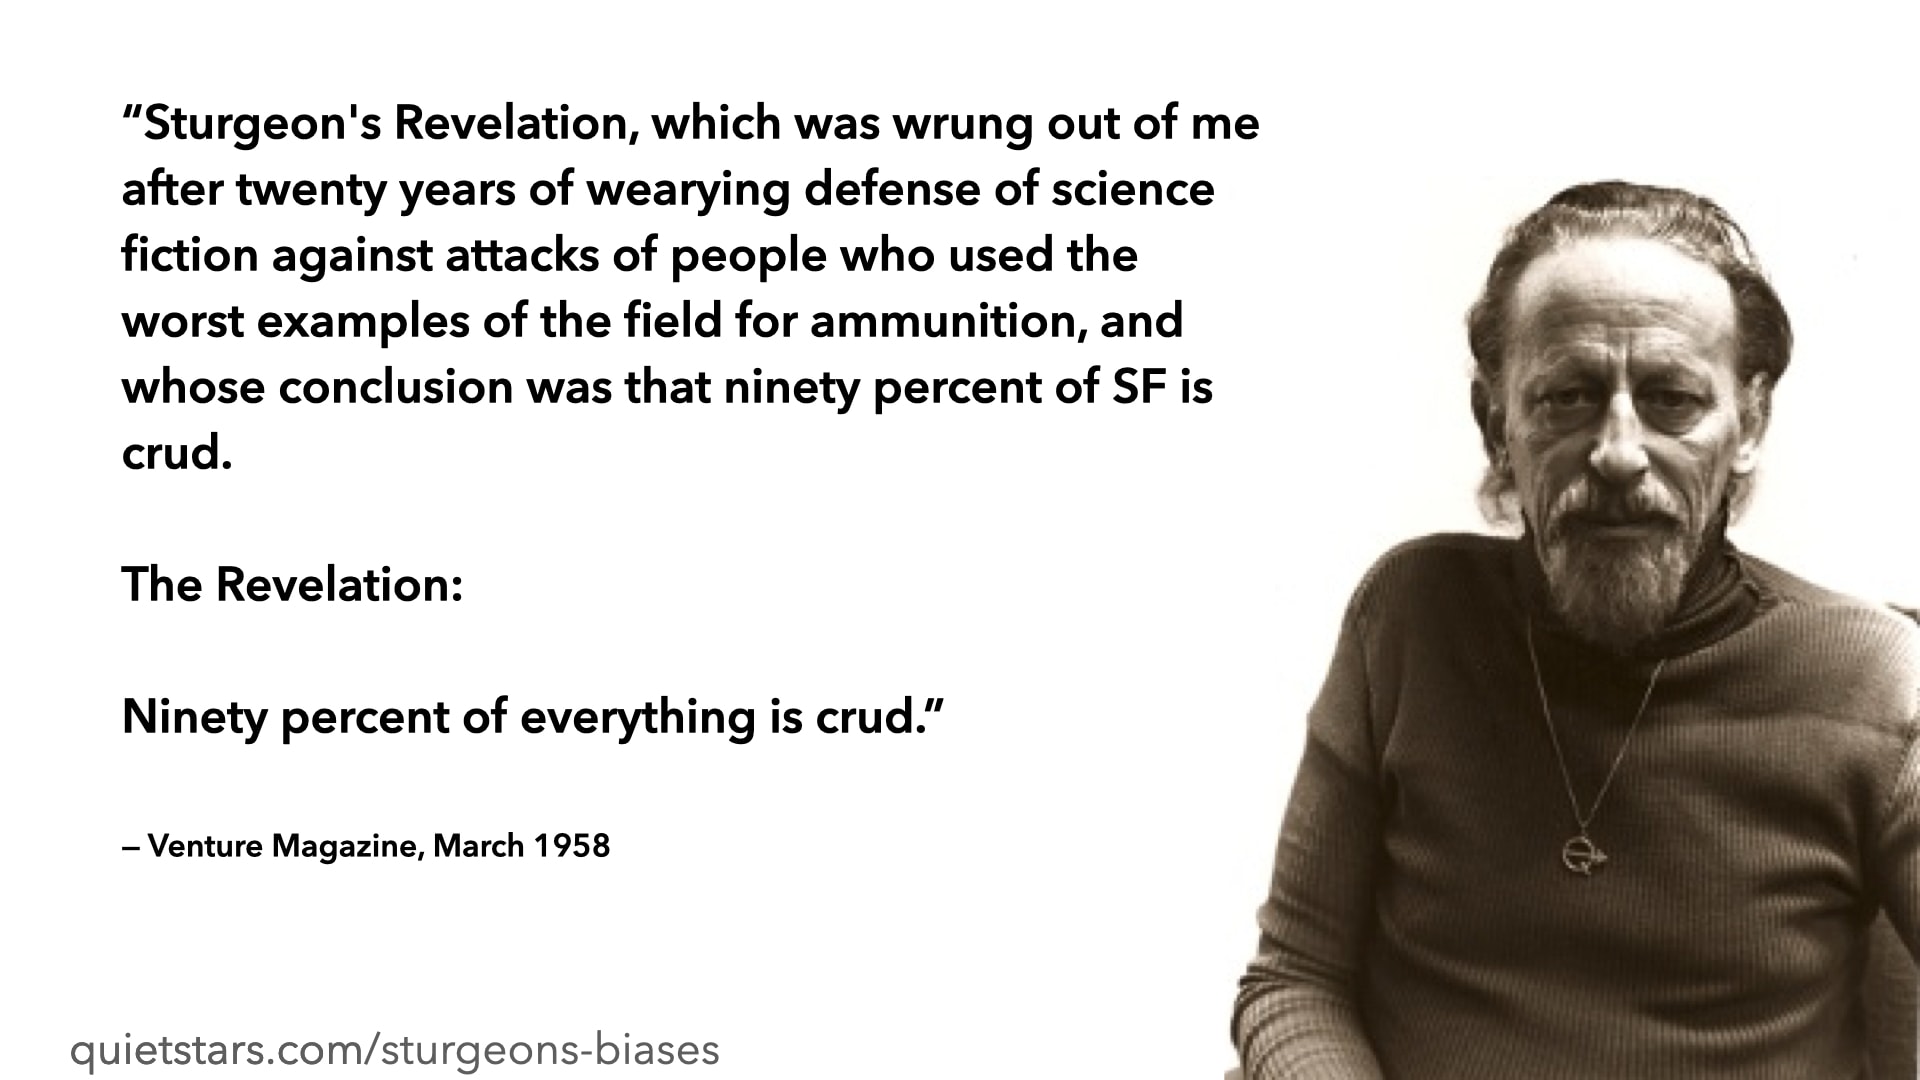 A quotation: Sturgeon's Revelation, which was wrung out of me after twenty years of wearying defense of science fiction against attacks of people who used the worst examples of the field for ammunition, and whose conclusion was that ninety percent of SF is crud. The Revelation: Ninety percent of everything is crud. — Venture Magazine, March 1958